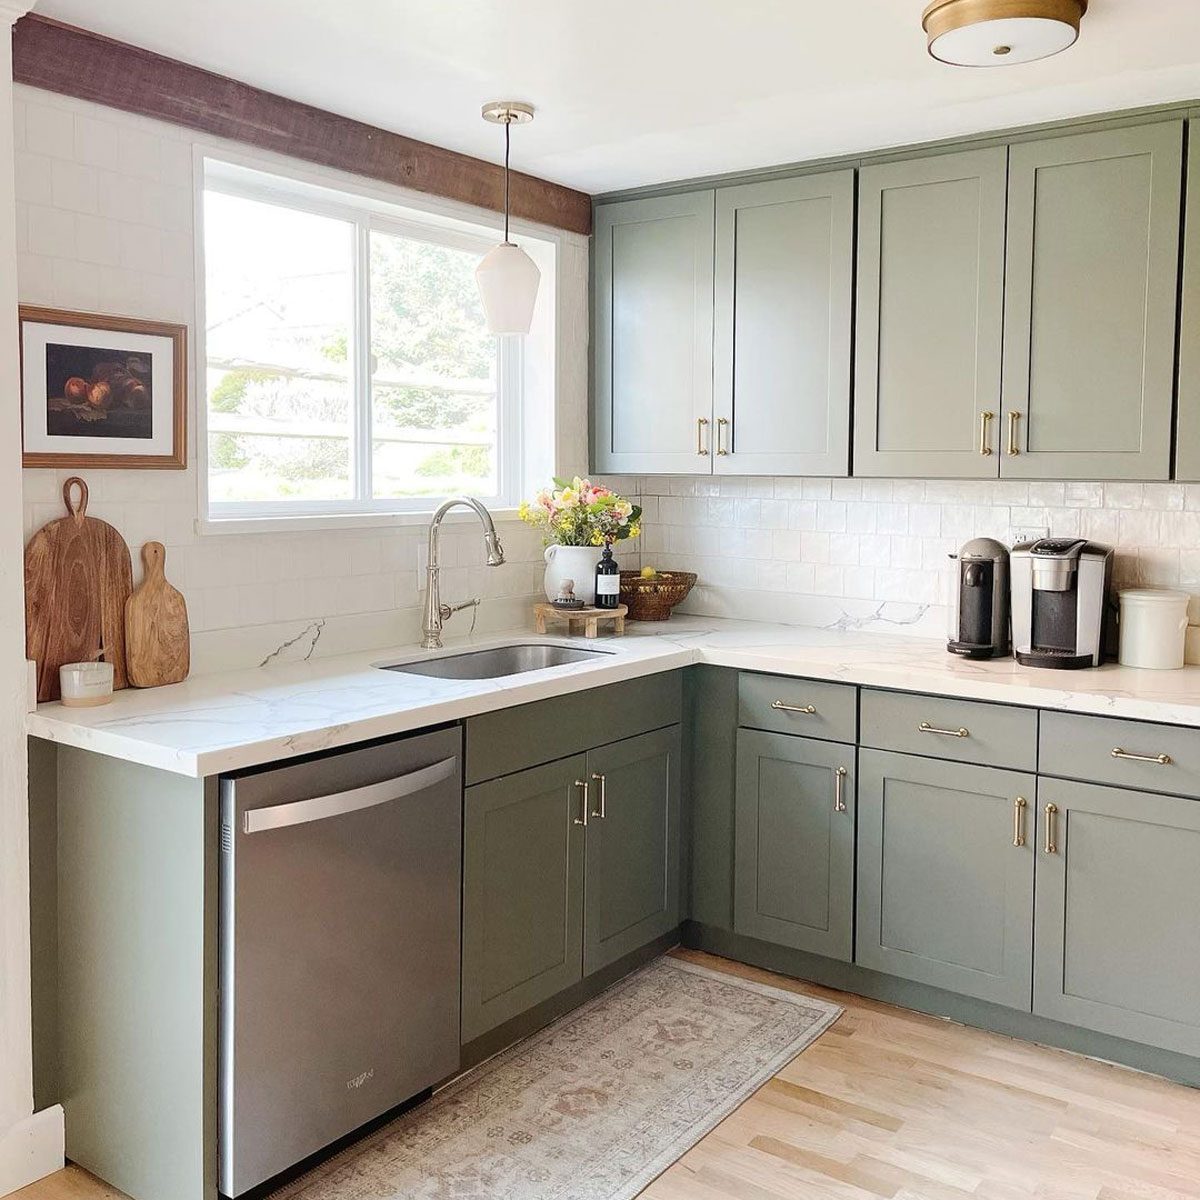 12 Kitchen Color Trends That Are Hot Right Now The Family Handyman